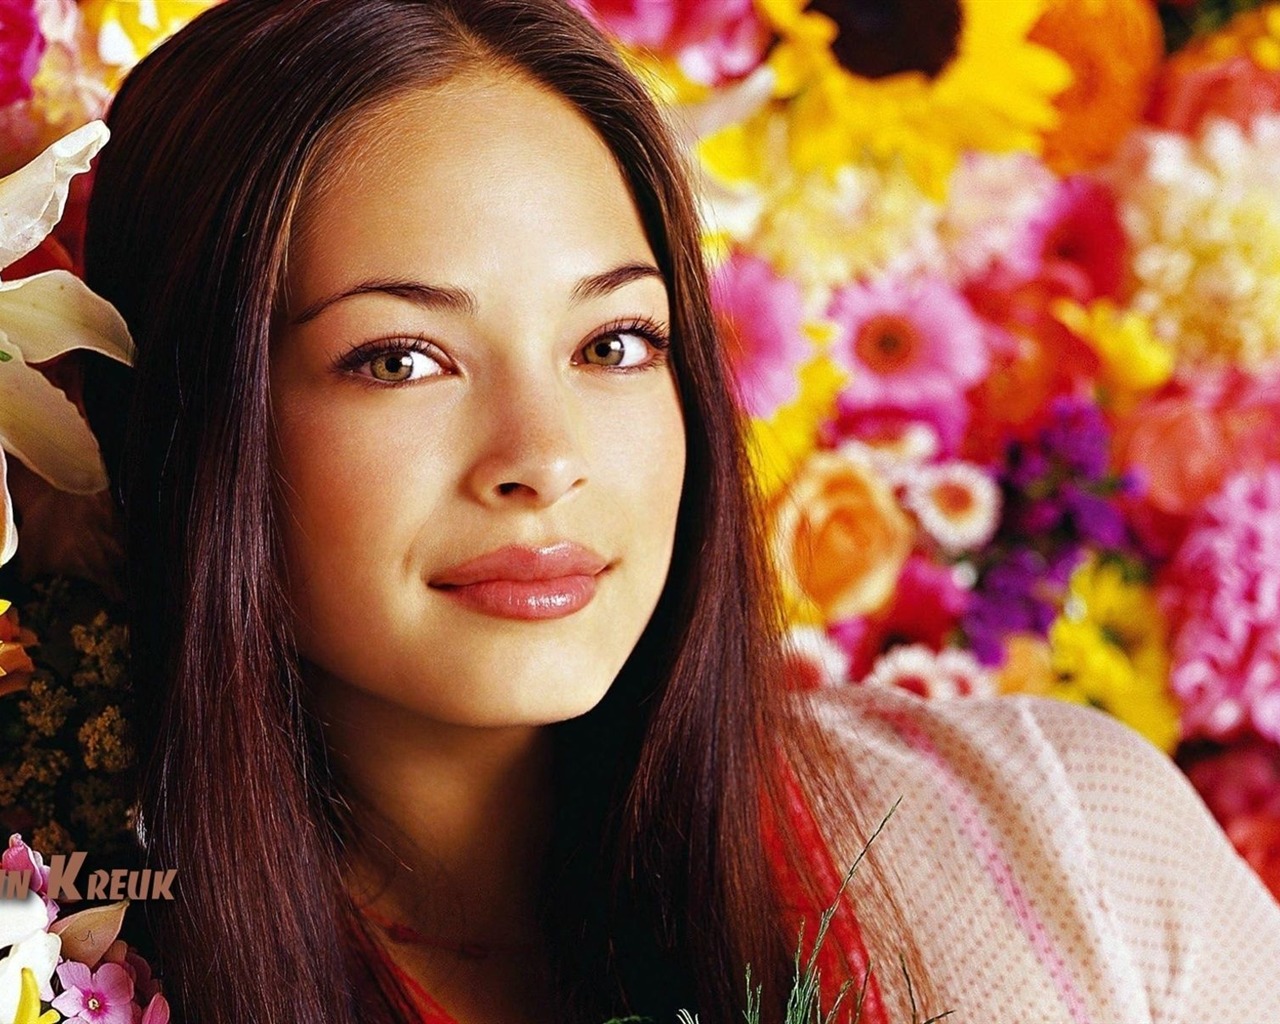 Kristin Kreuk #006 - 1280x1024 Wallpapers Pictures Photos Images